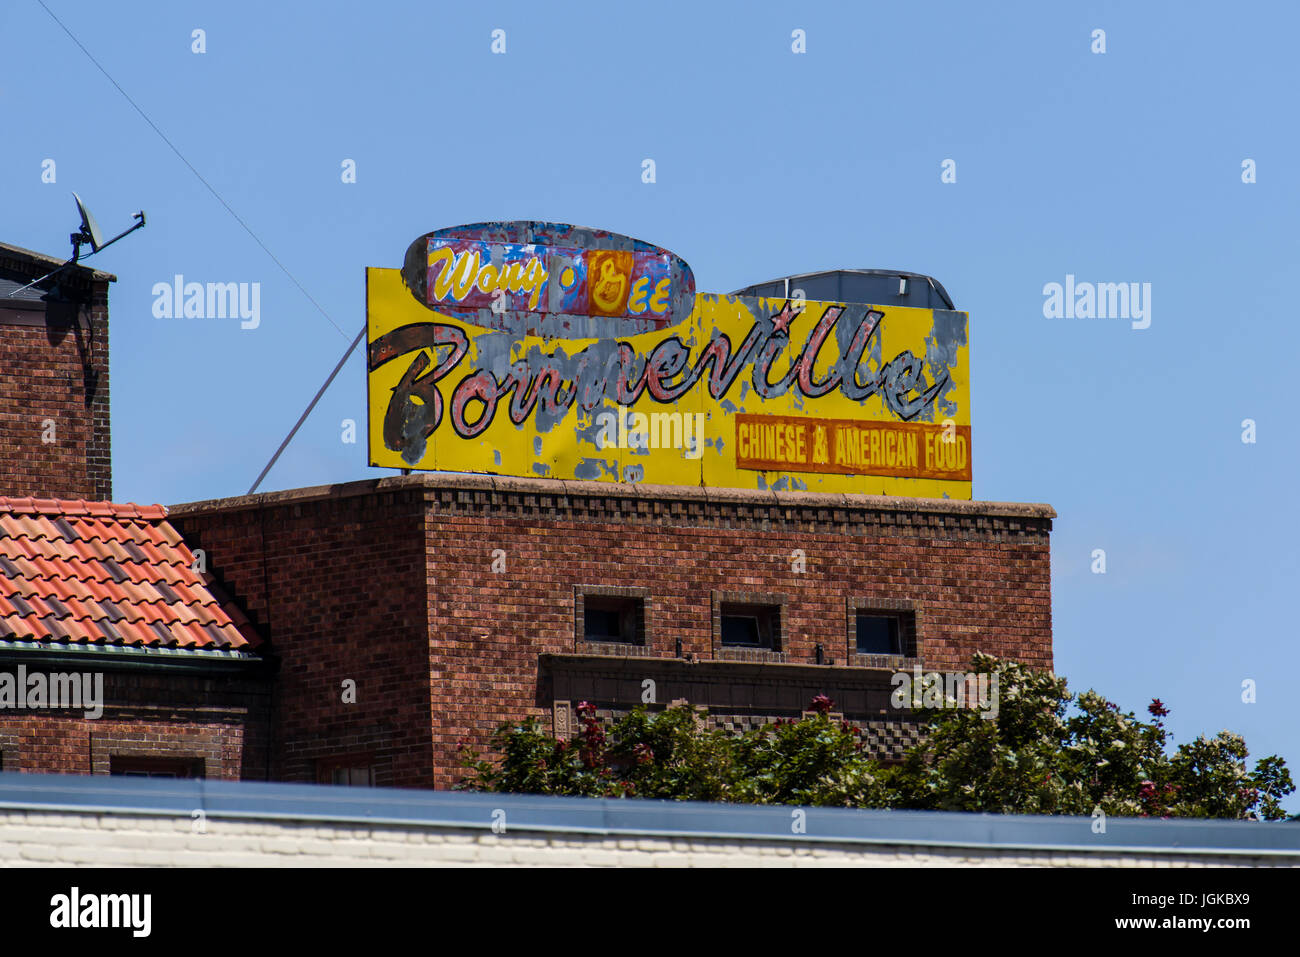 Wong Gee restaurant sign on a building in Idaho Falls, Idaho Stock Photo